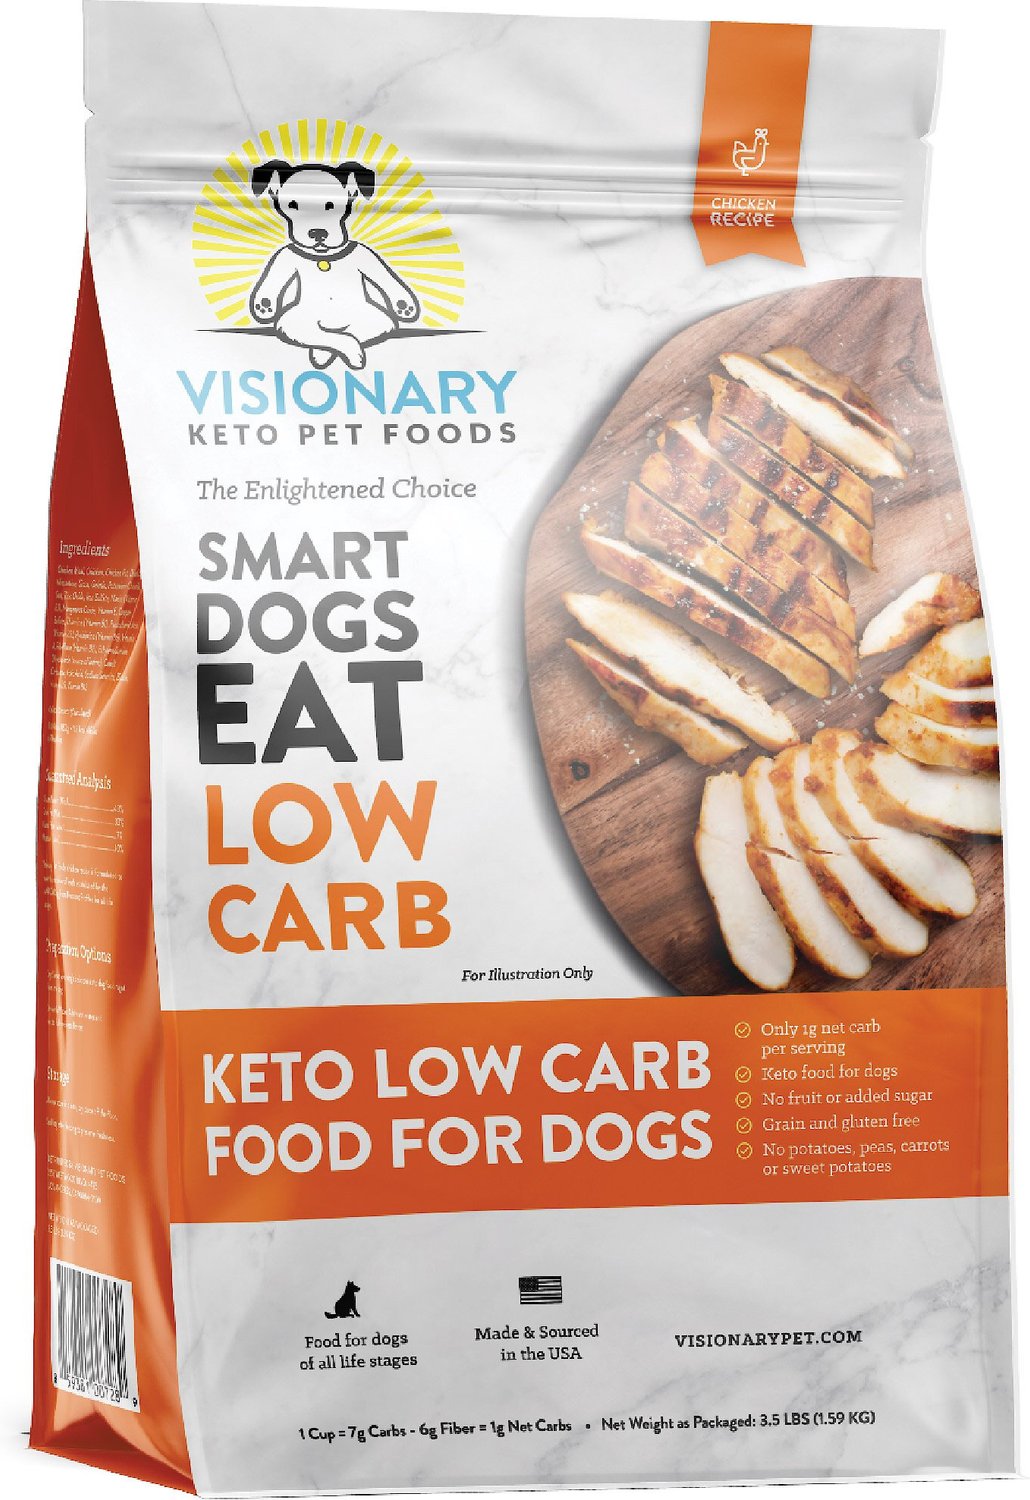 VISIONARY PET FOODS Keto Low Carb Chicken Recipe Dry Dog Food, 3.5lb